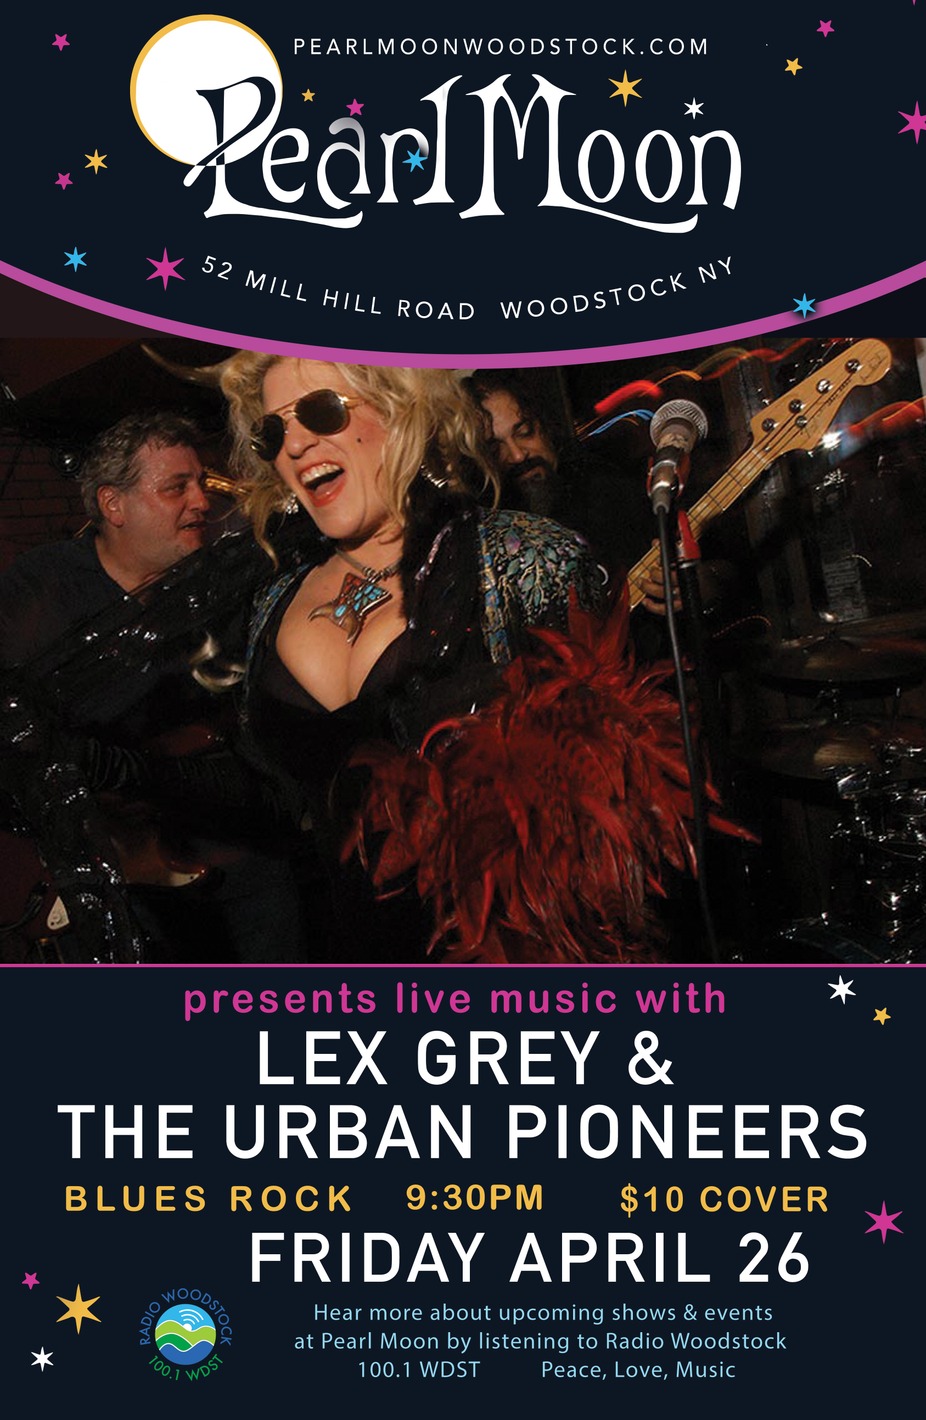 LEX GREY & THE URBAN PIONEERS at PEARL MOON WOODSTOCK event photo